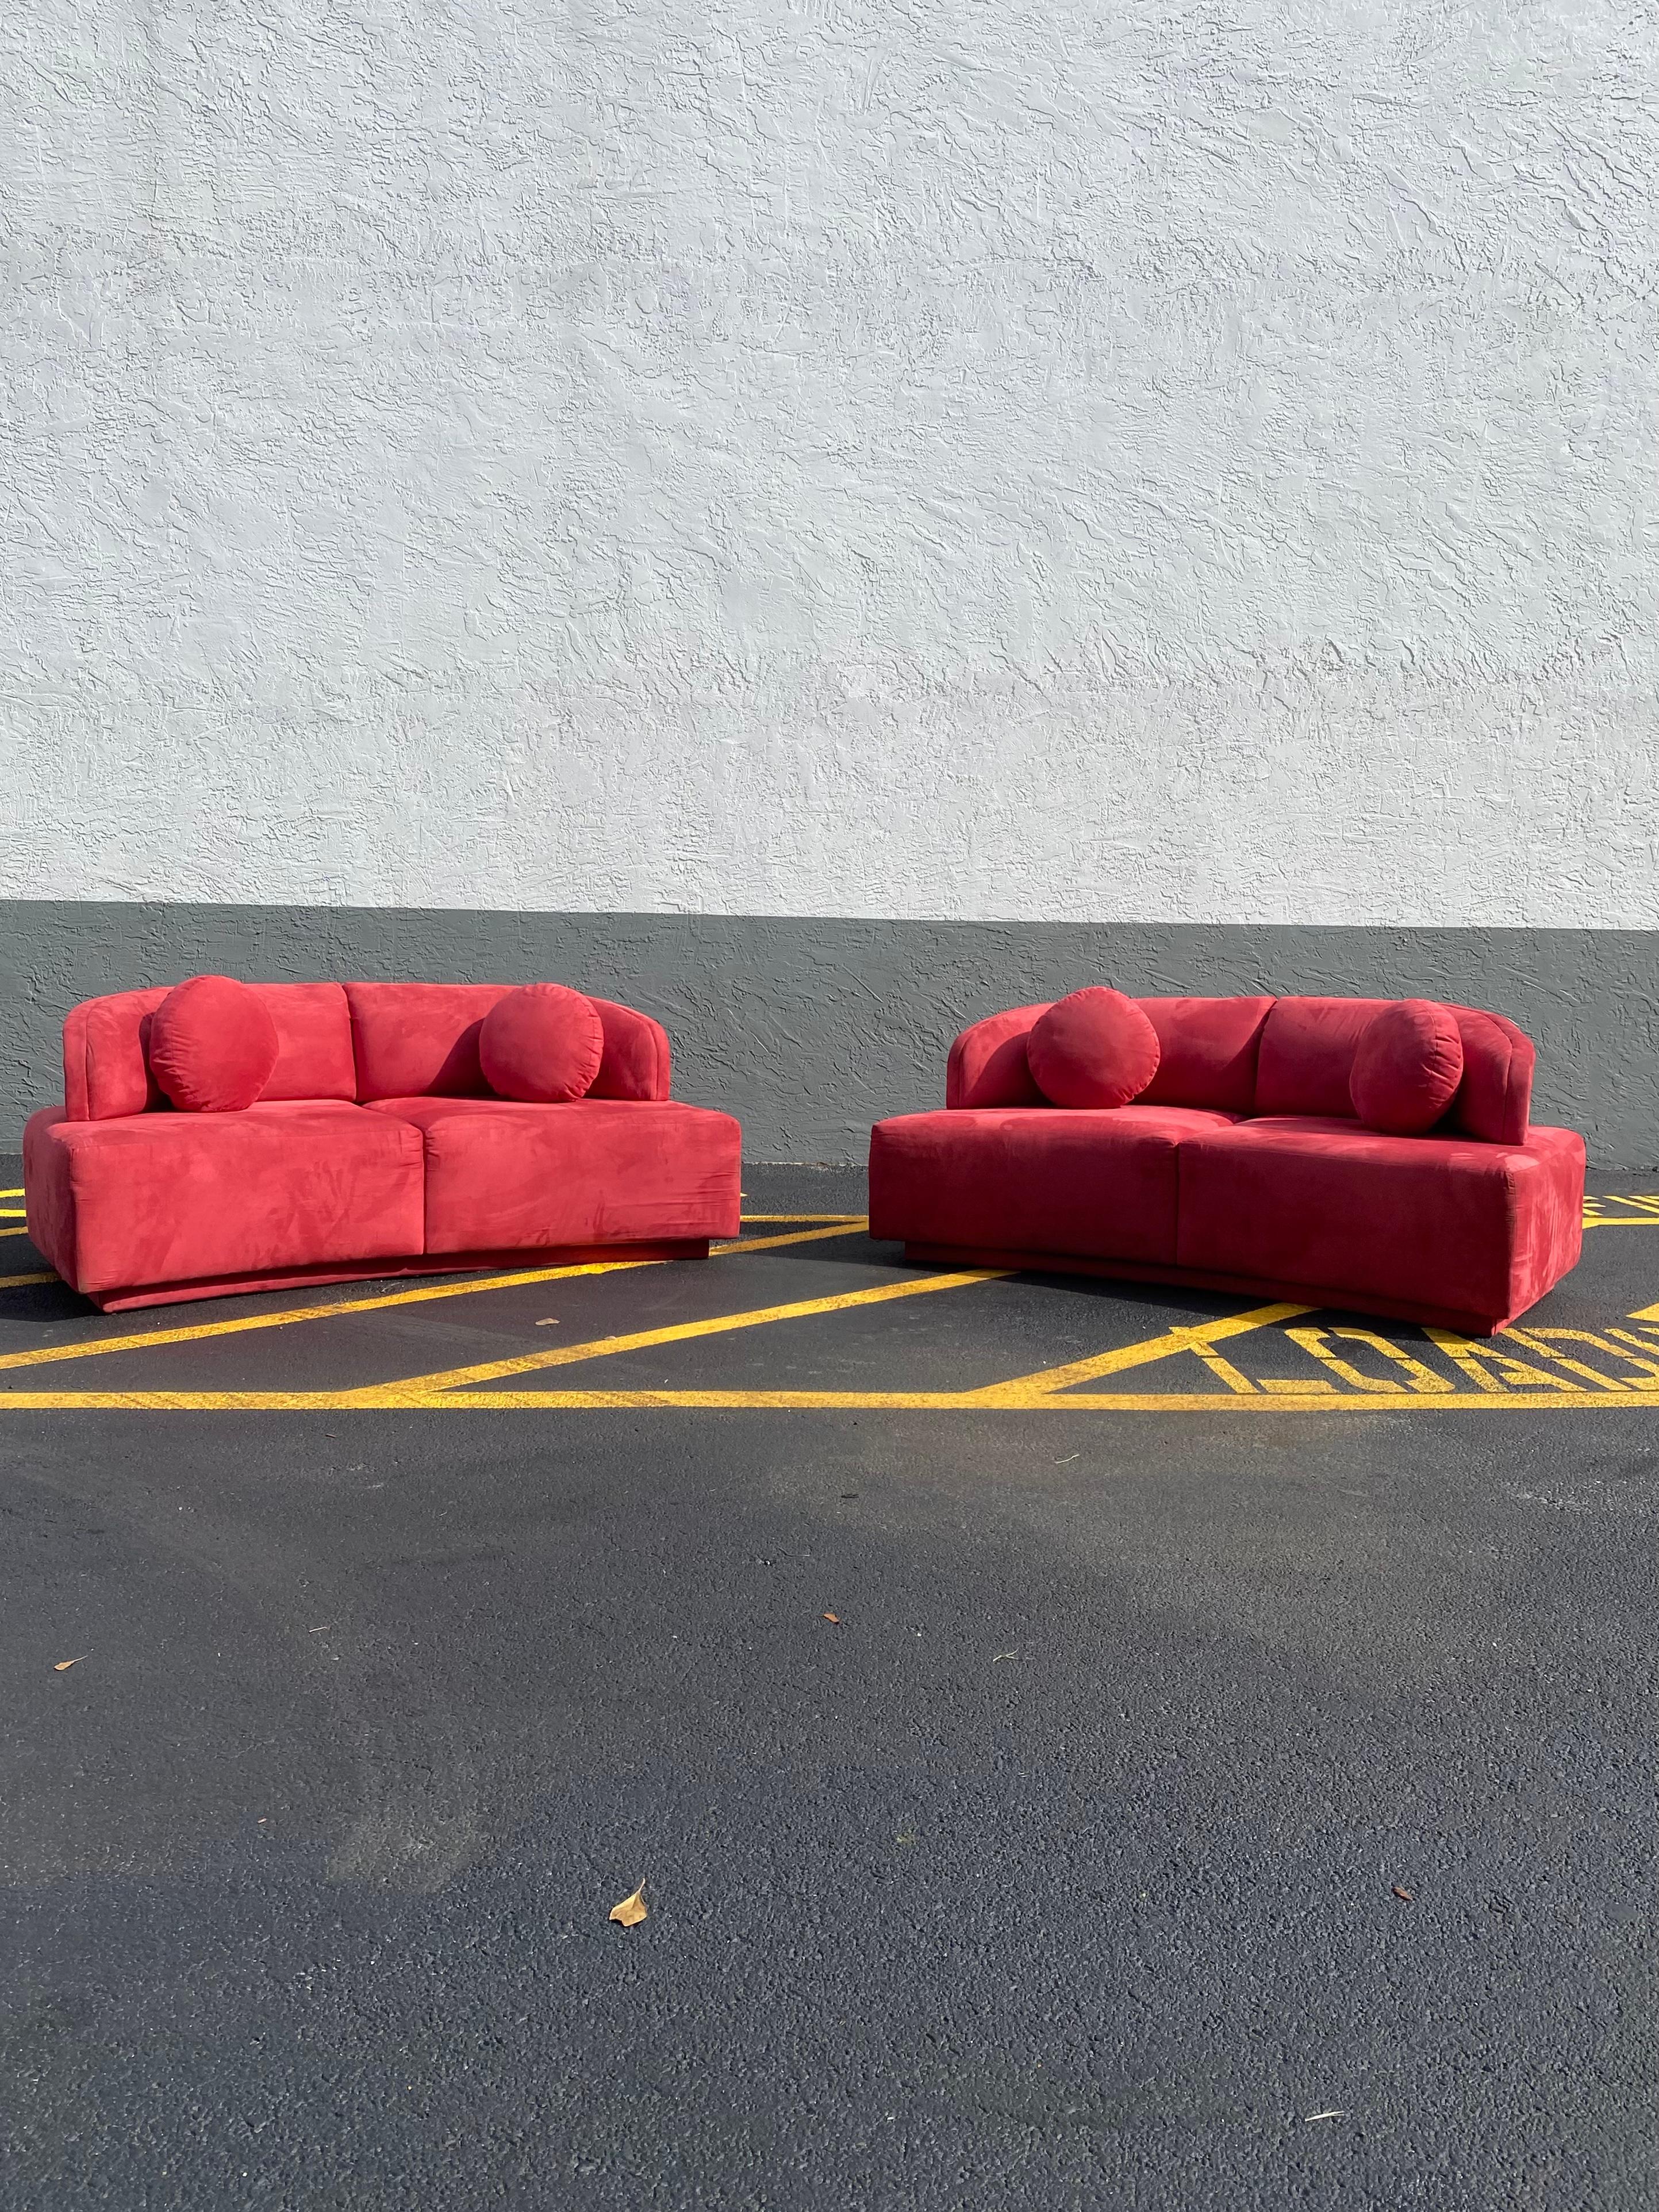 red cloud couch